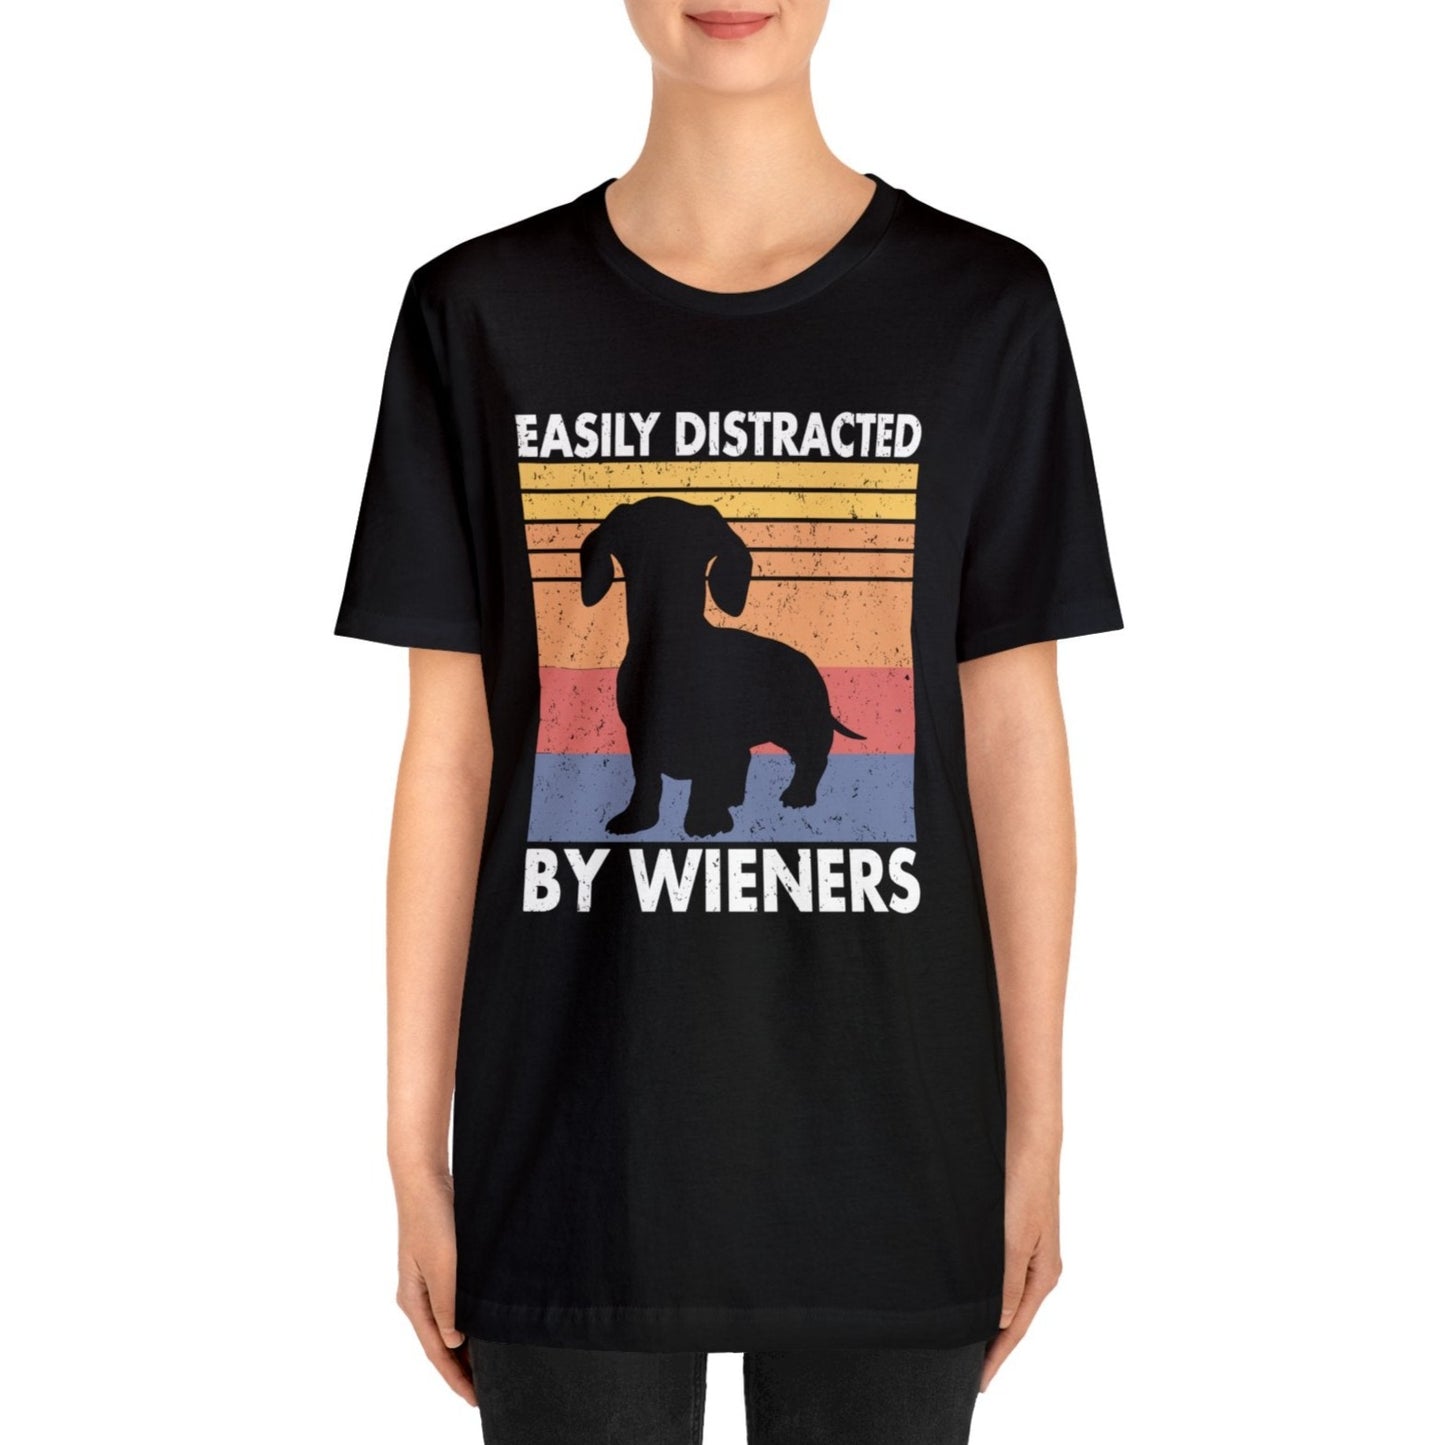 Dachshund Shirt - Easily distracted by wieners - Dachshund Gift